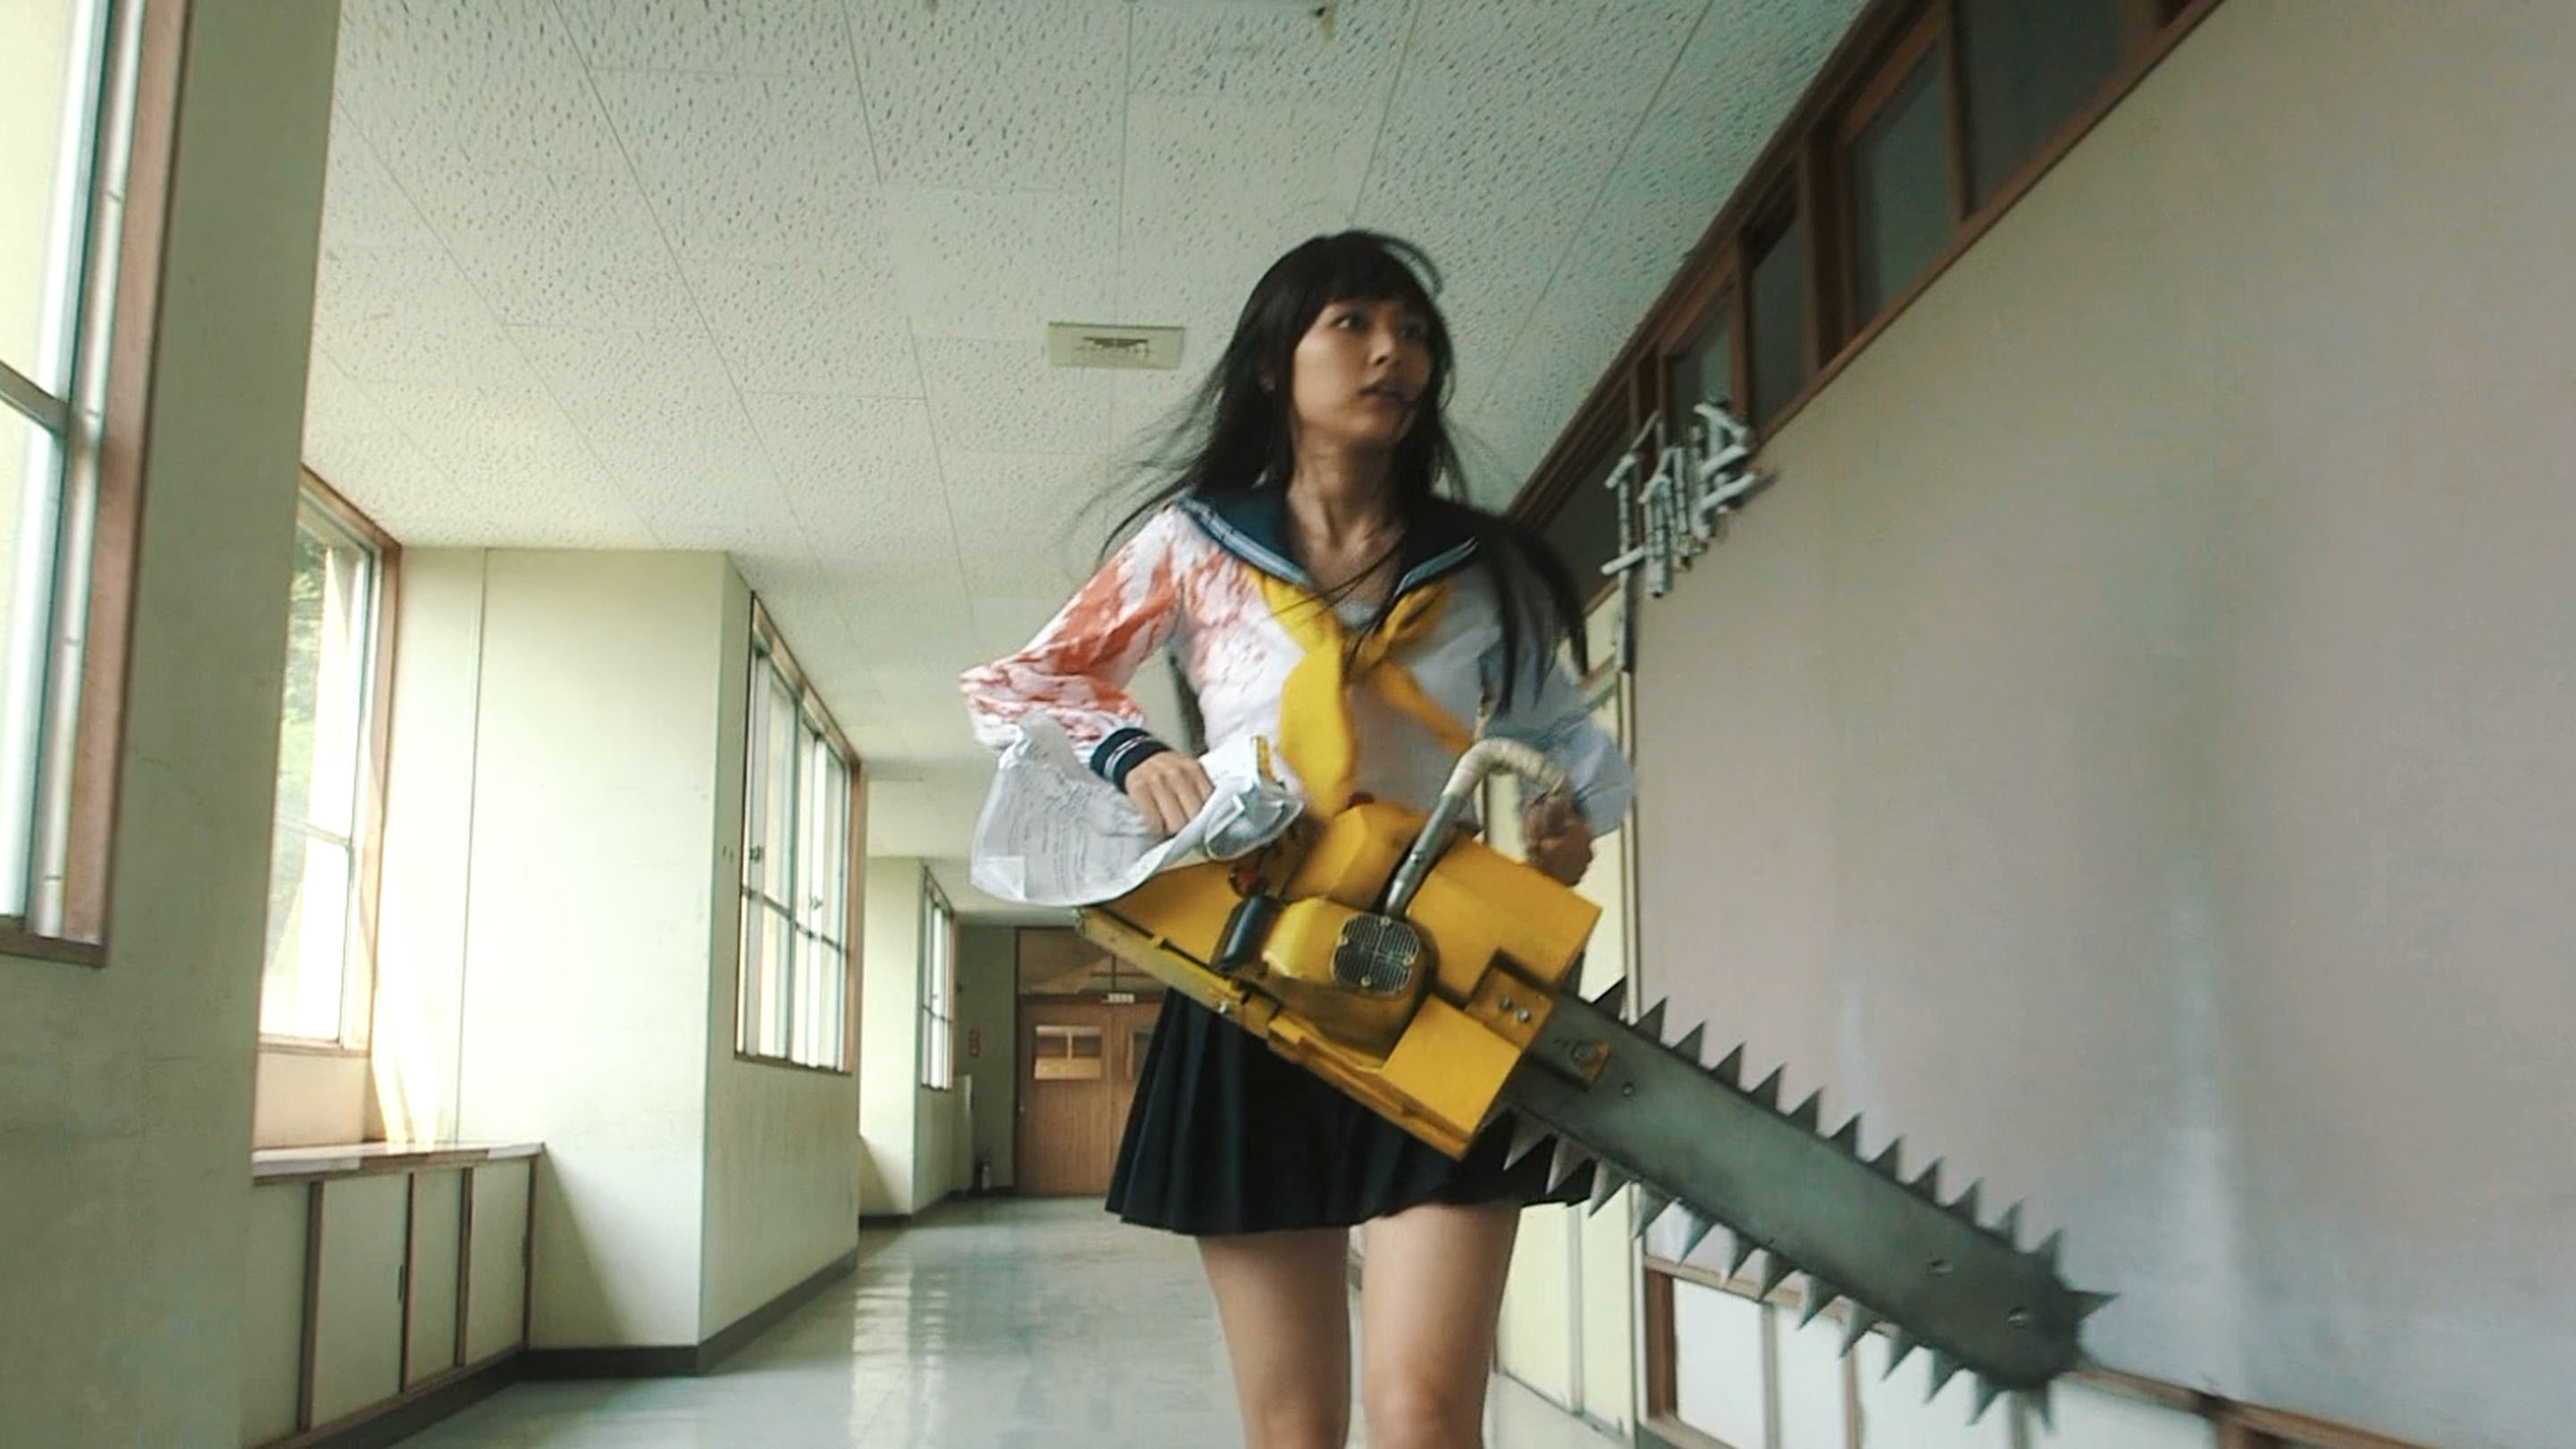 Rio Uxhida and chainsaw on her way to class in Bloody Chainsa Girl (2016)